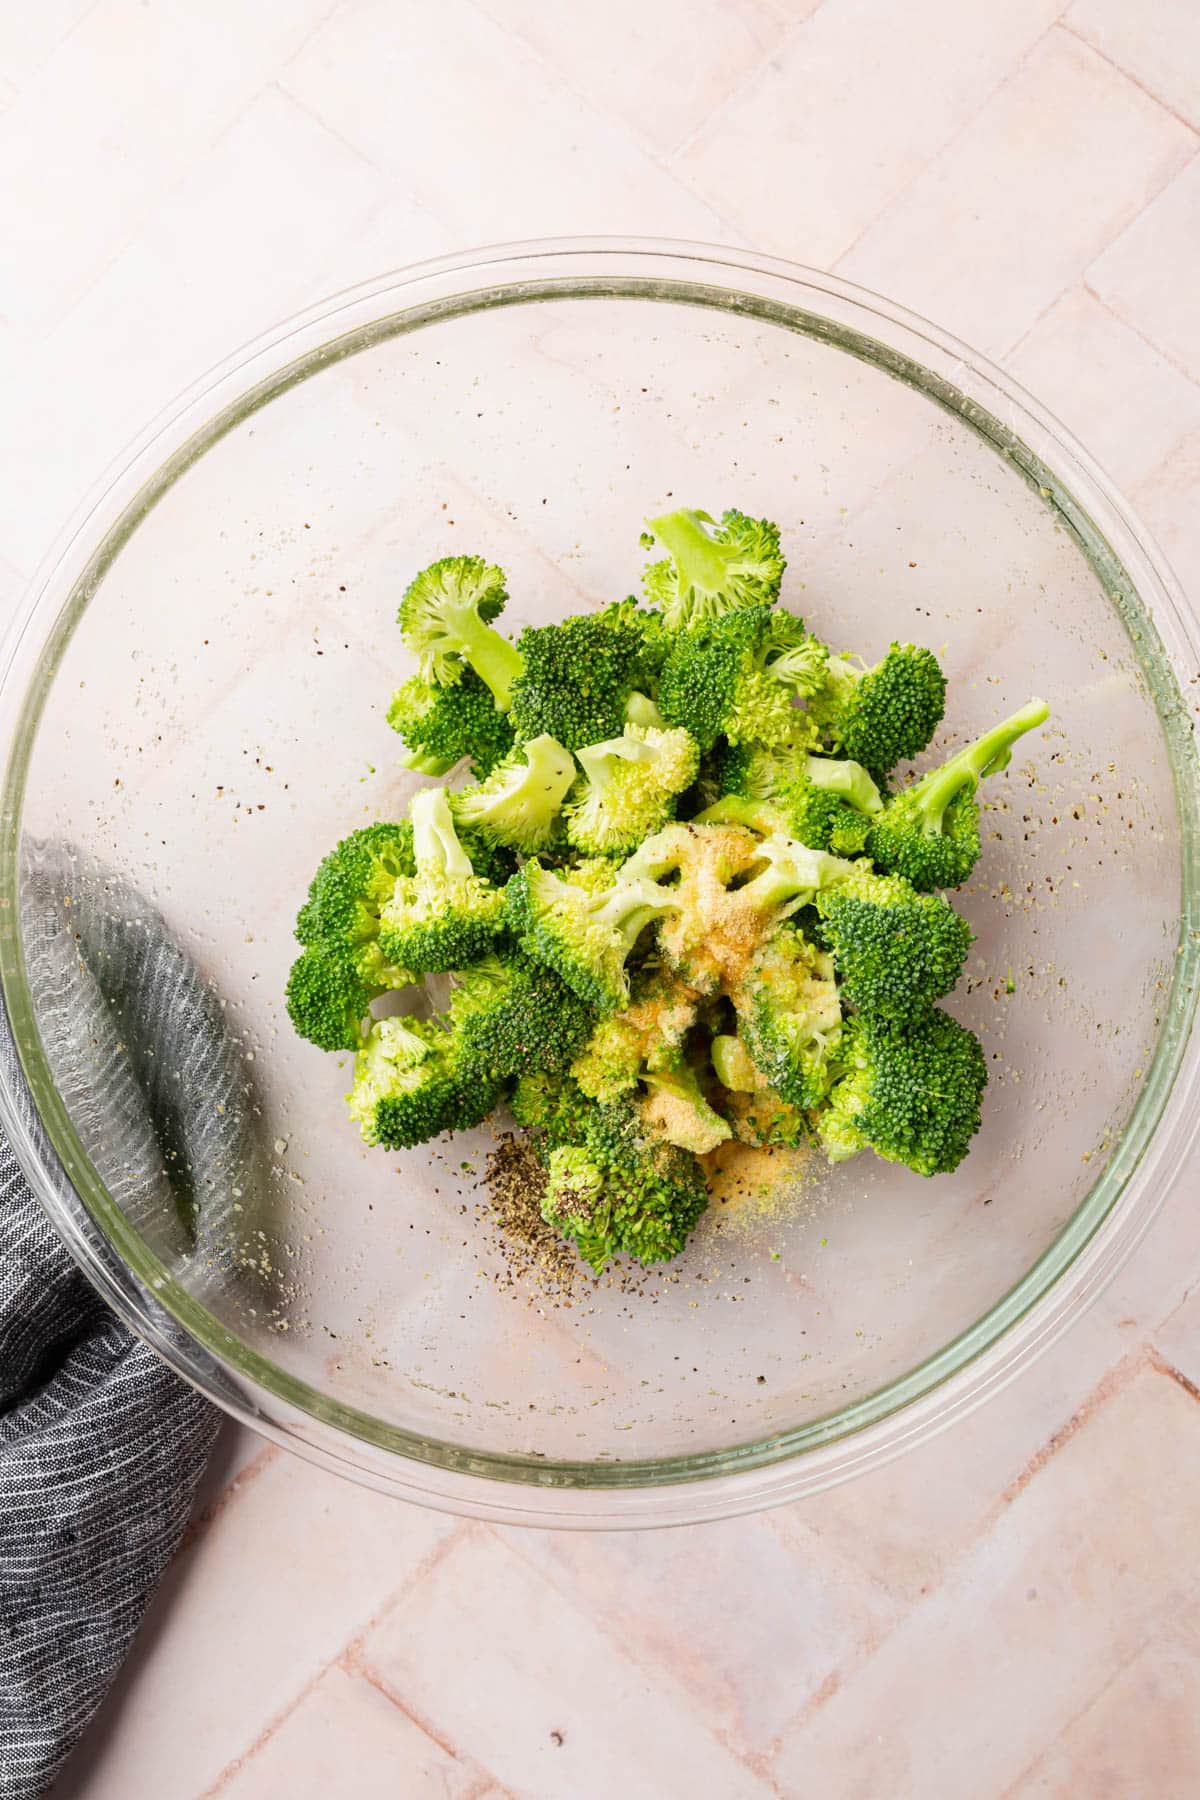 A glass mixing bowl with broccoli florets topped with olive oil, garlic powder, onion powder, salt, and pepper.